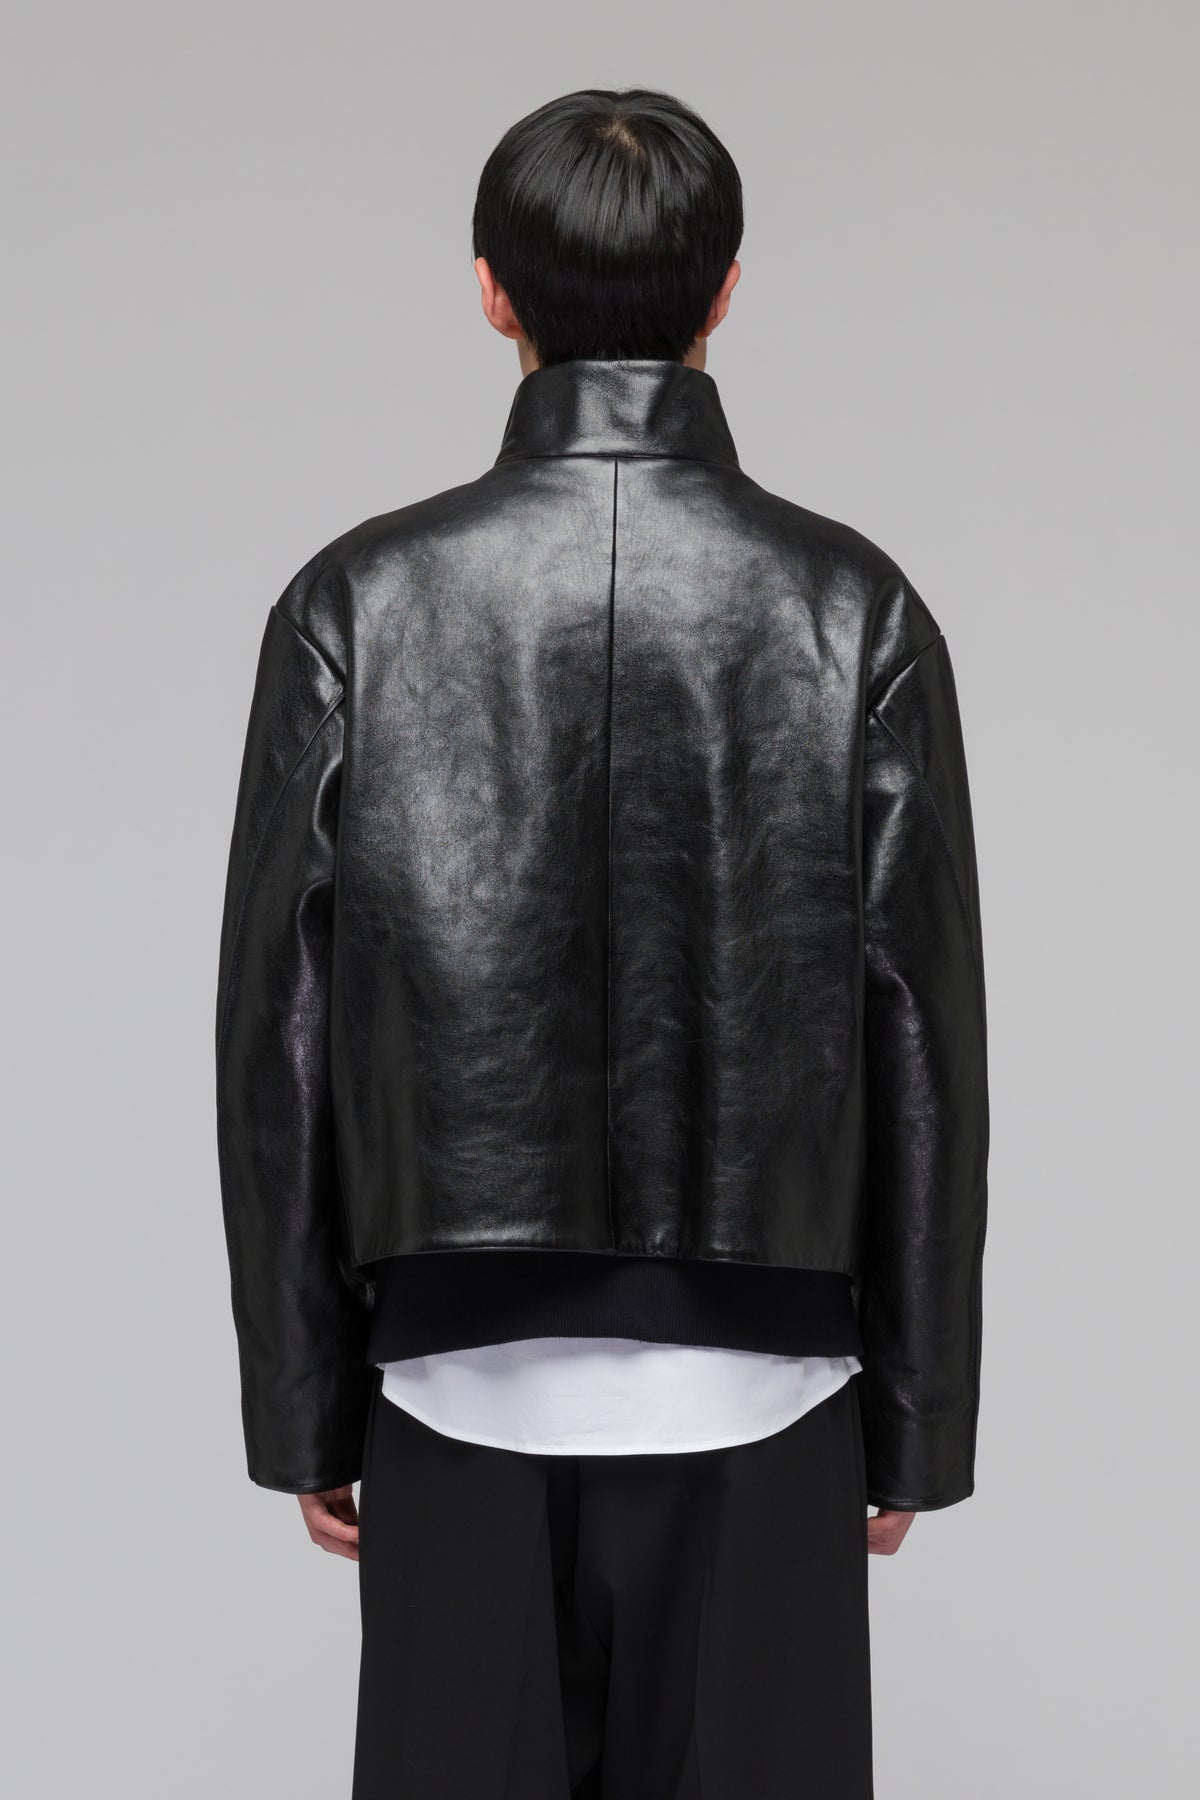 LEATHER ''OFFICER'S'' JACKET